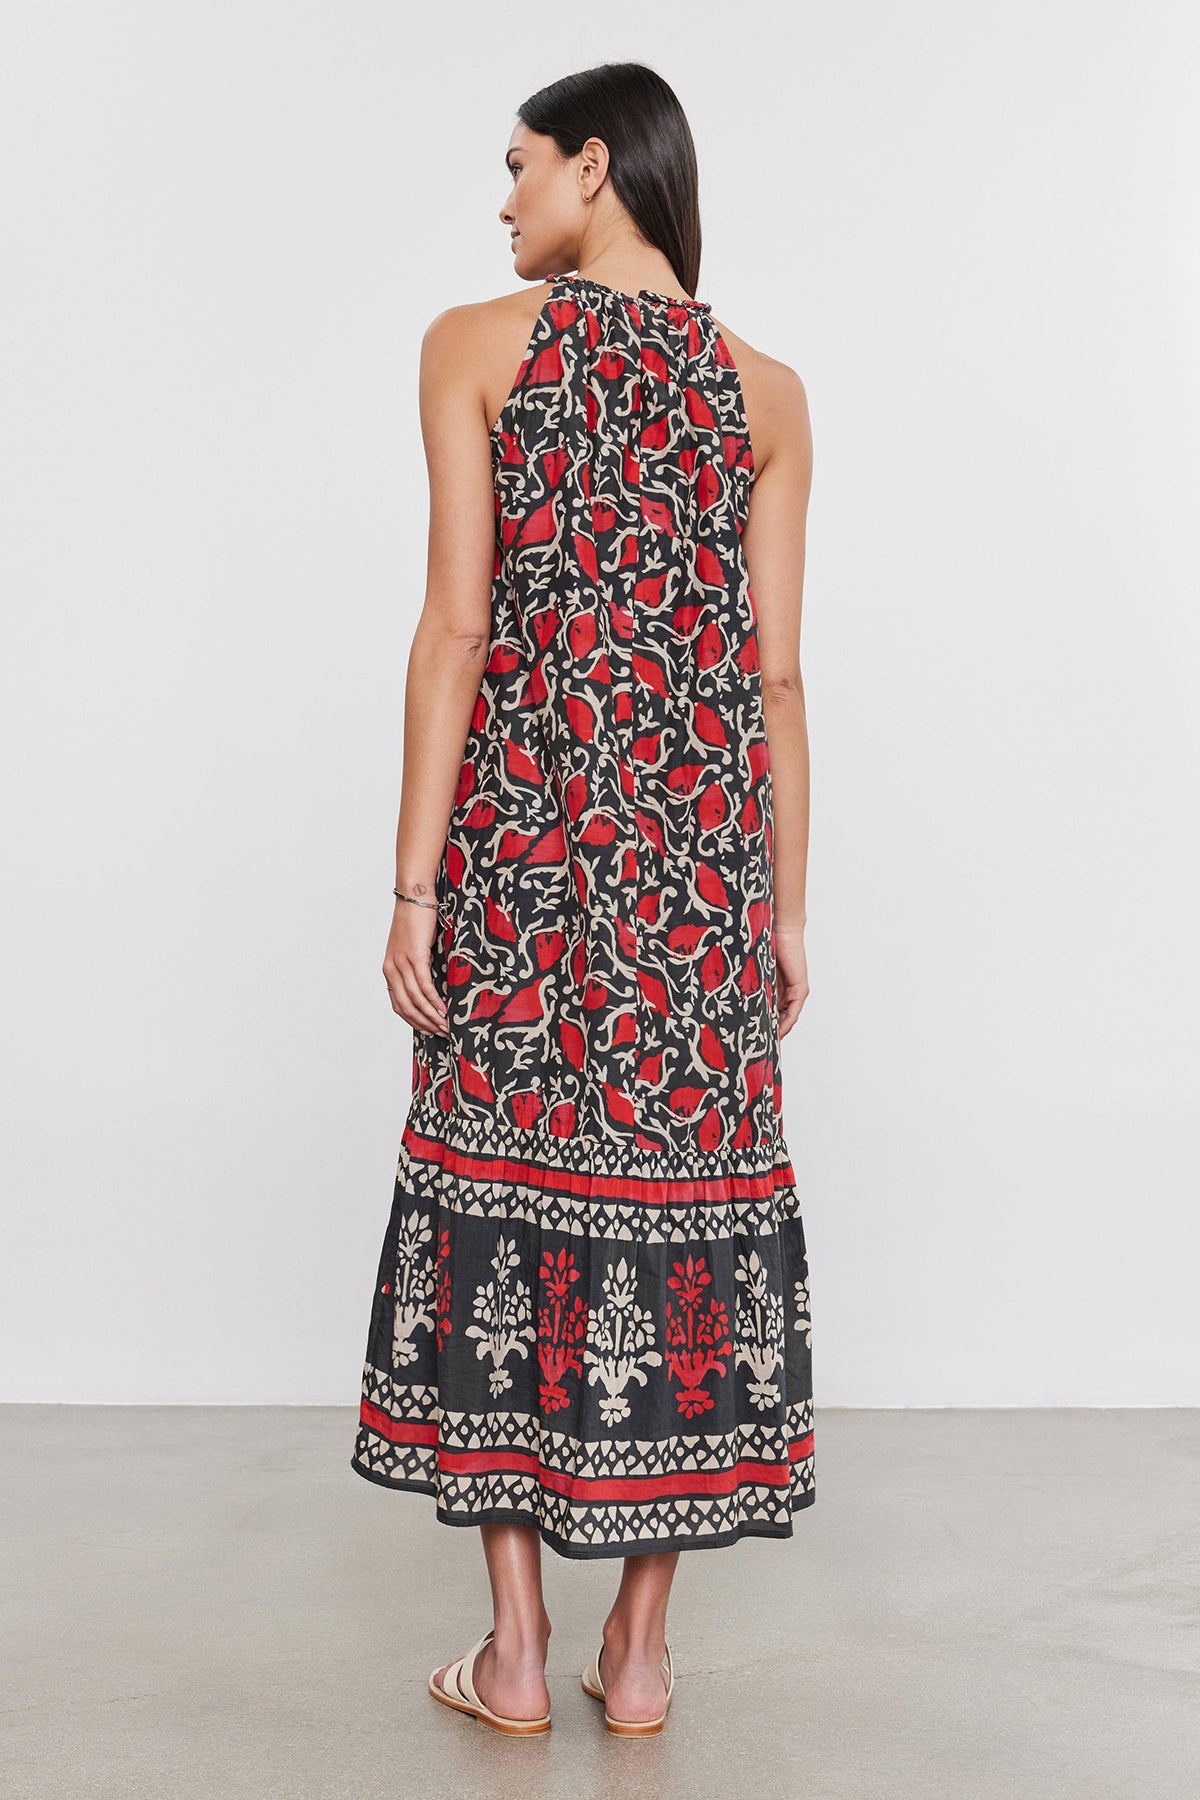   Woman standing, viewed from the back, wearing a long, sleeveless black silk cotton voile GHITA DRESS by Velvet by Graham & Spencer with bold red and white floral prints, standing in a plain studio setting. 